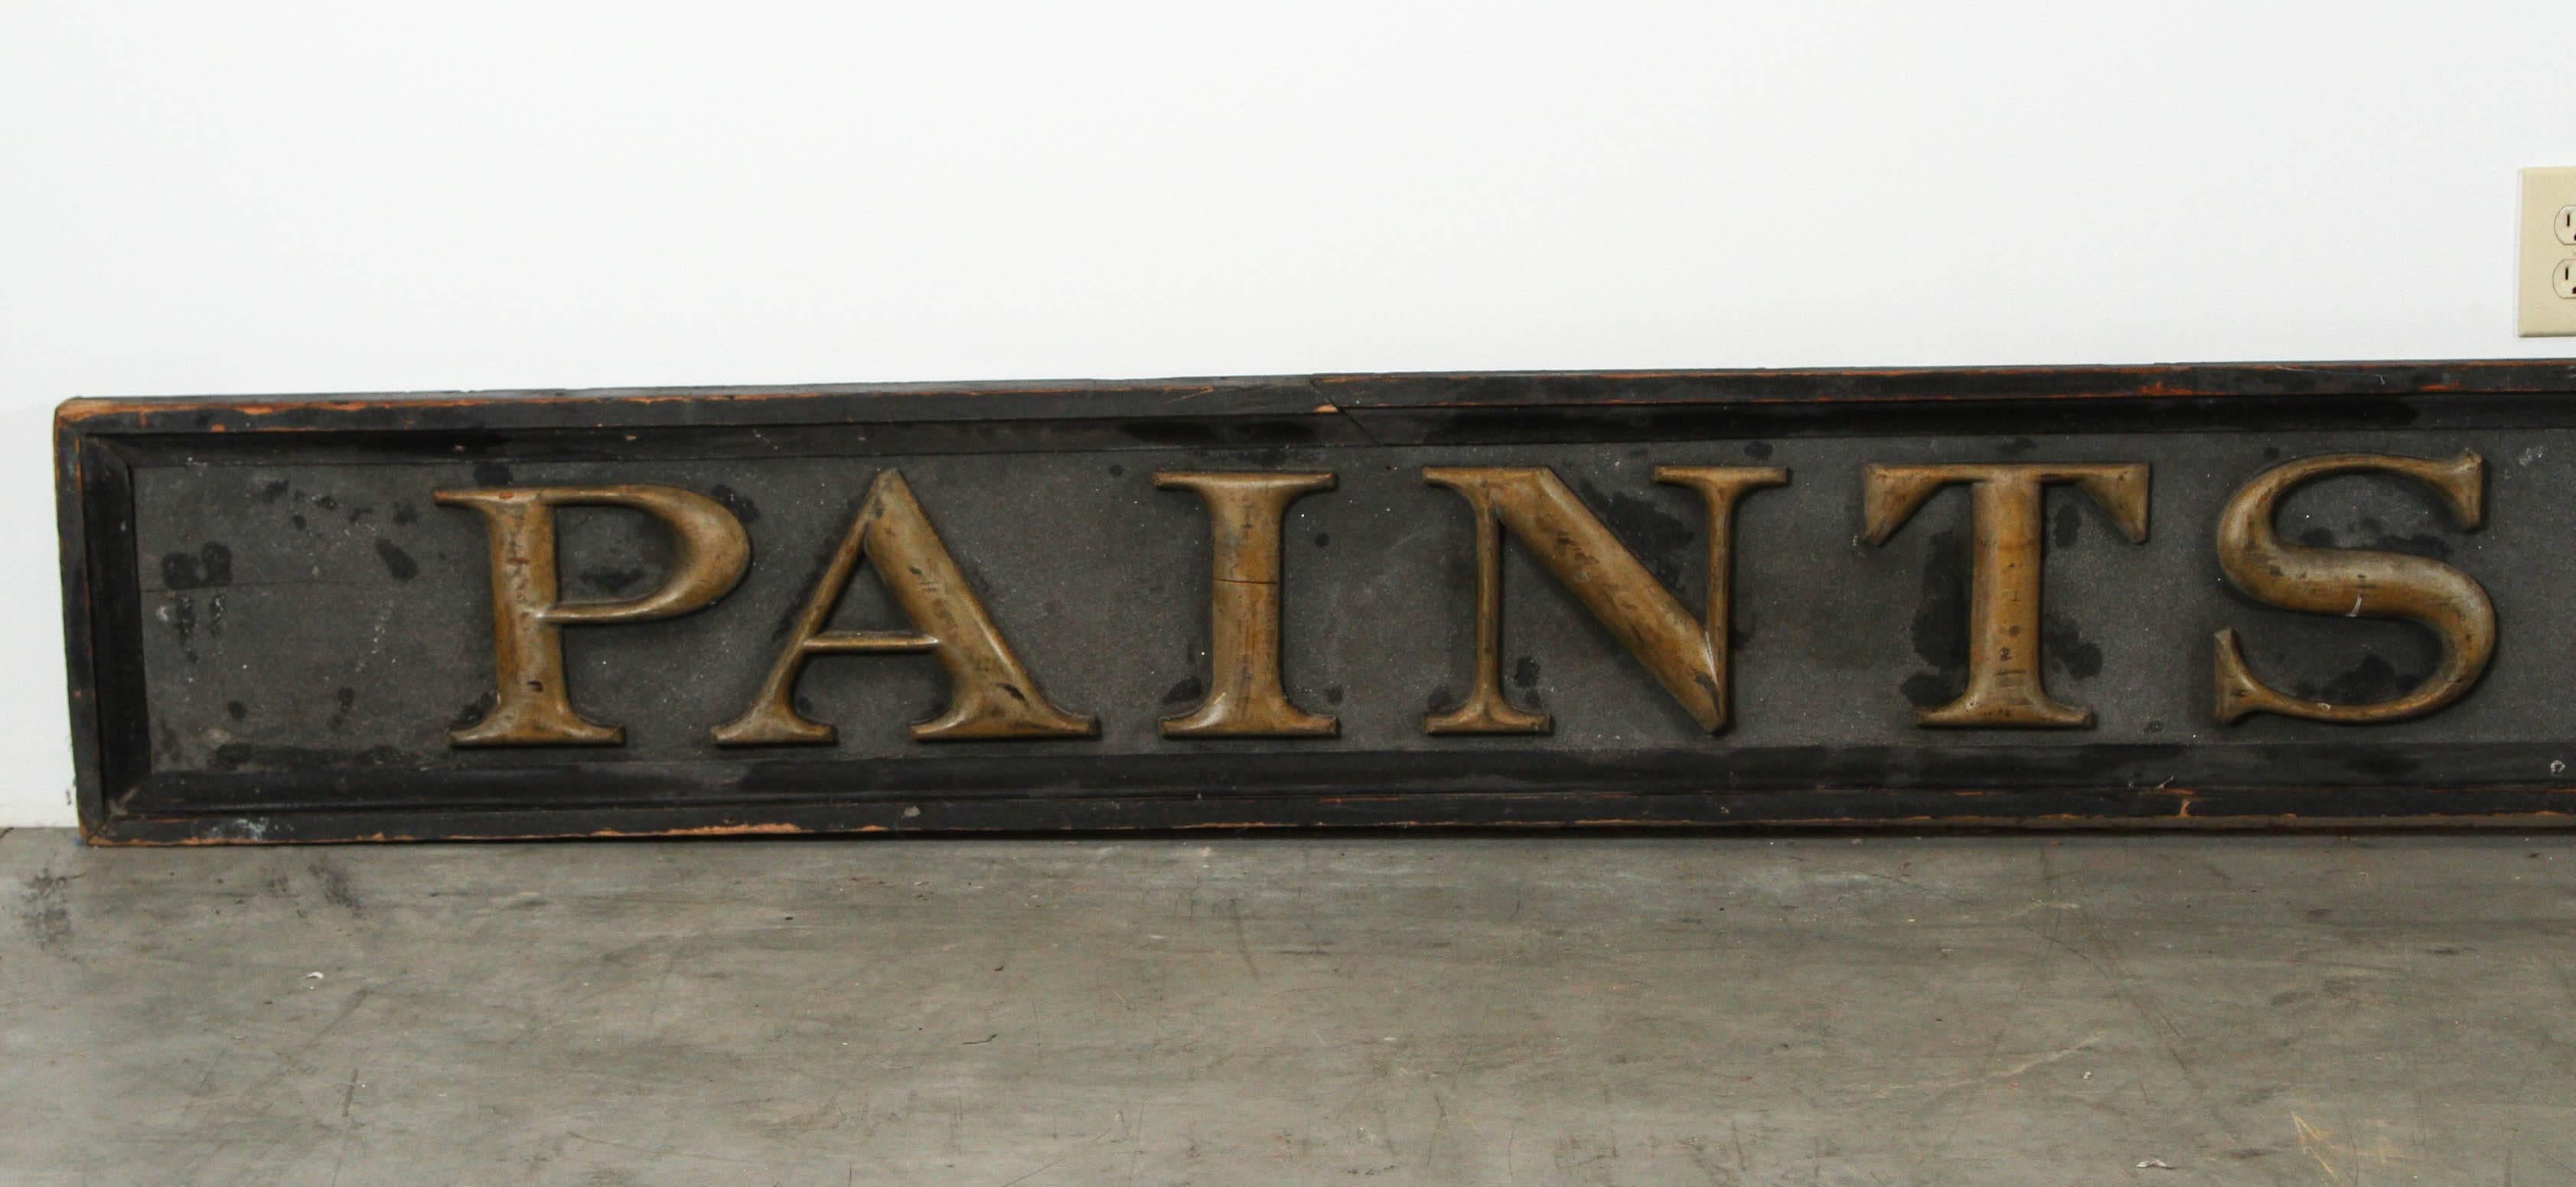 Fantastic three dimensional letters, wood and sand paint. 